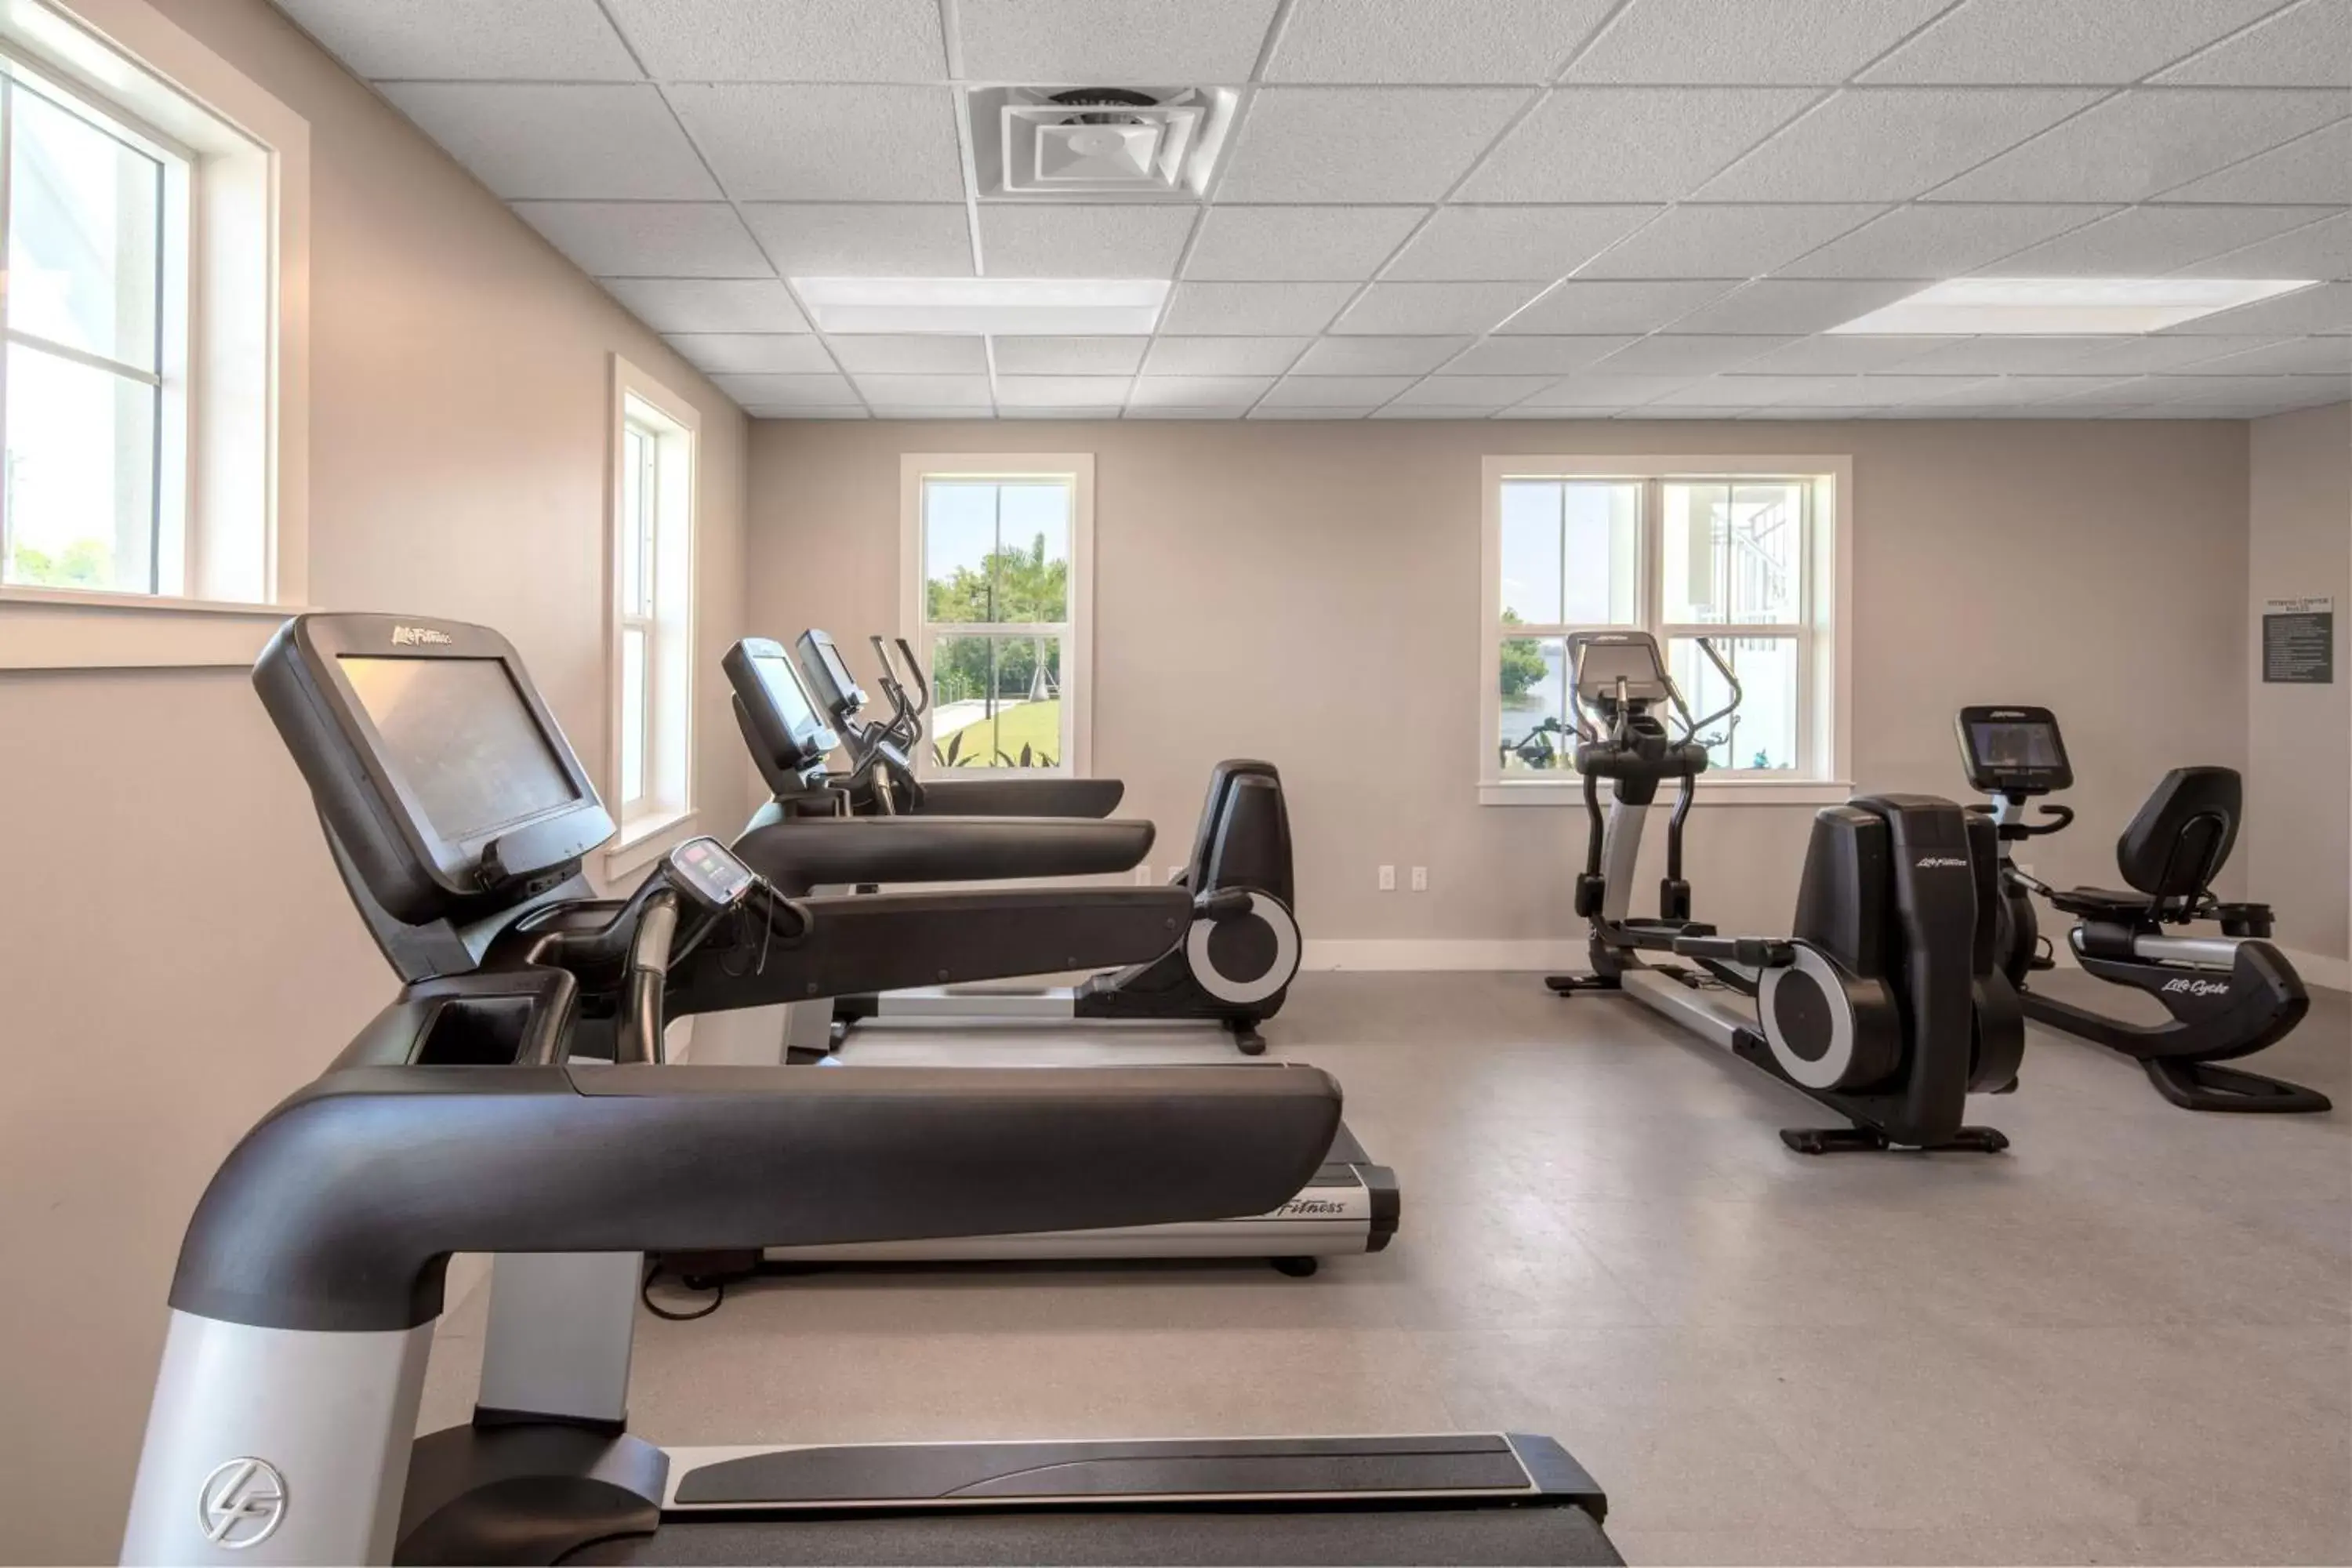 Fitness centre/facilities, Fitness Center/Facilities in Waterline Marina Resort & Beach Club, Autograph Collection